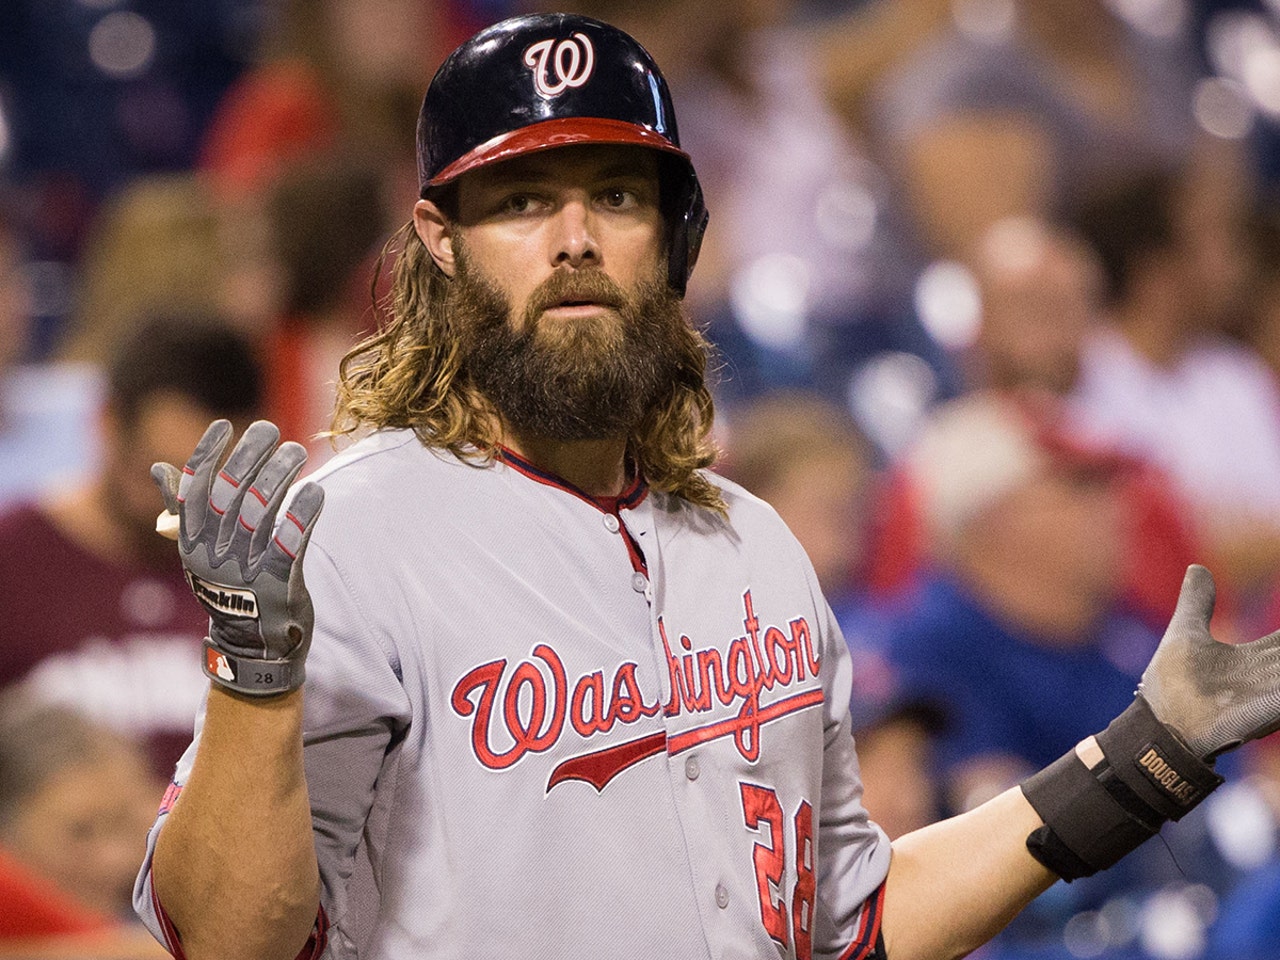 Nationals' Jayson Werth Explains Why the Team Is Struggling - East